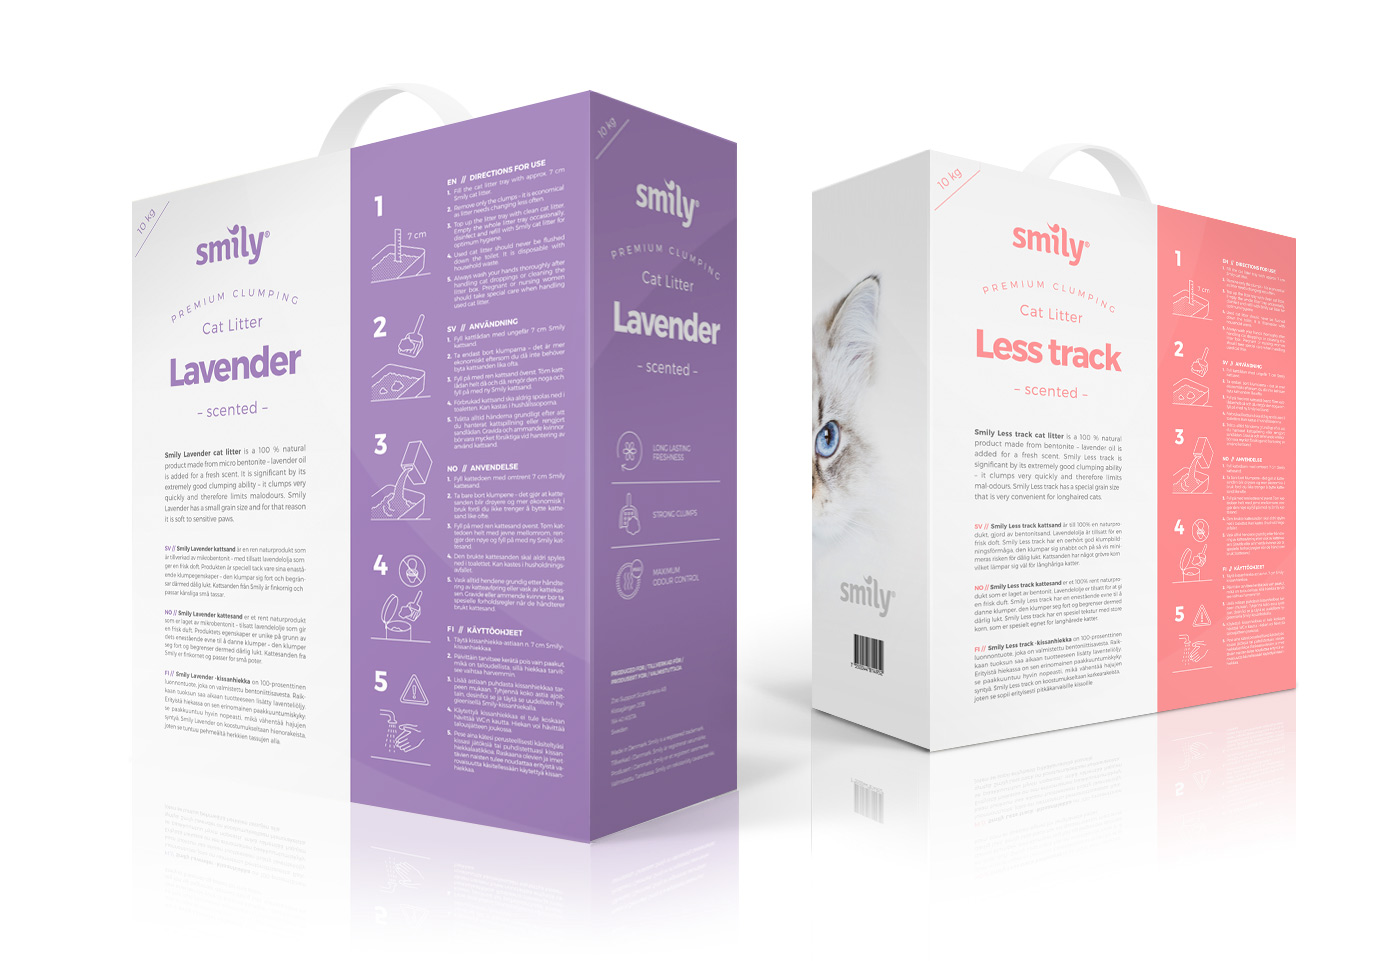 Smily CatLitter collection package design